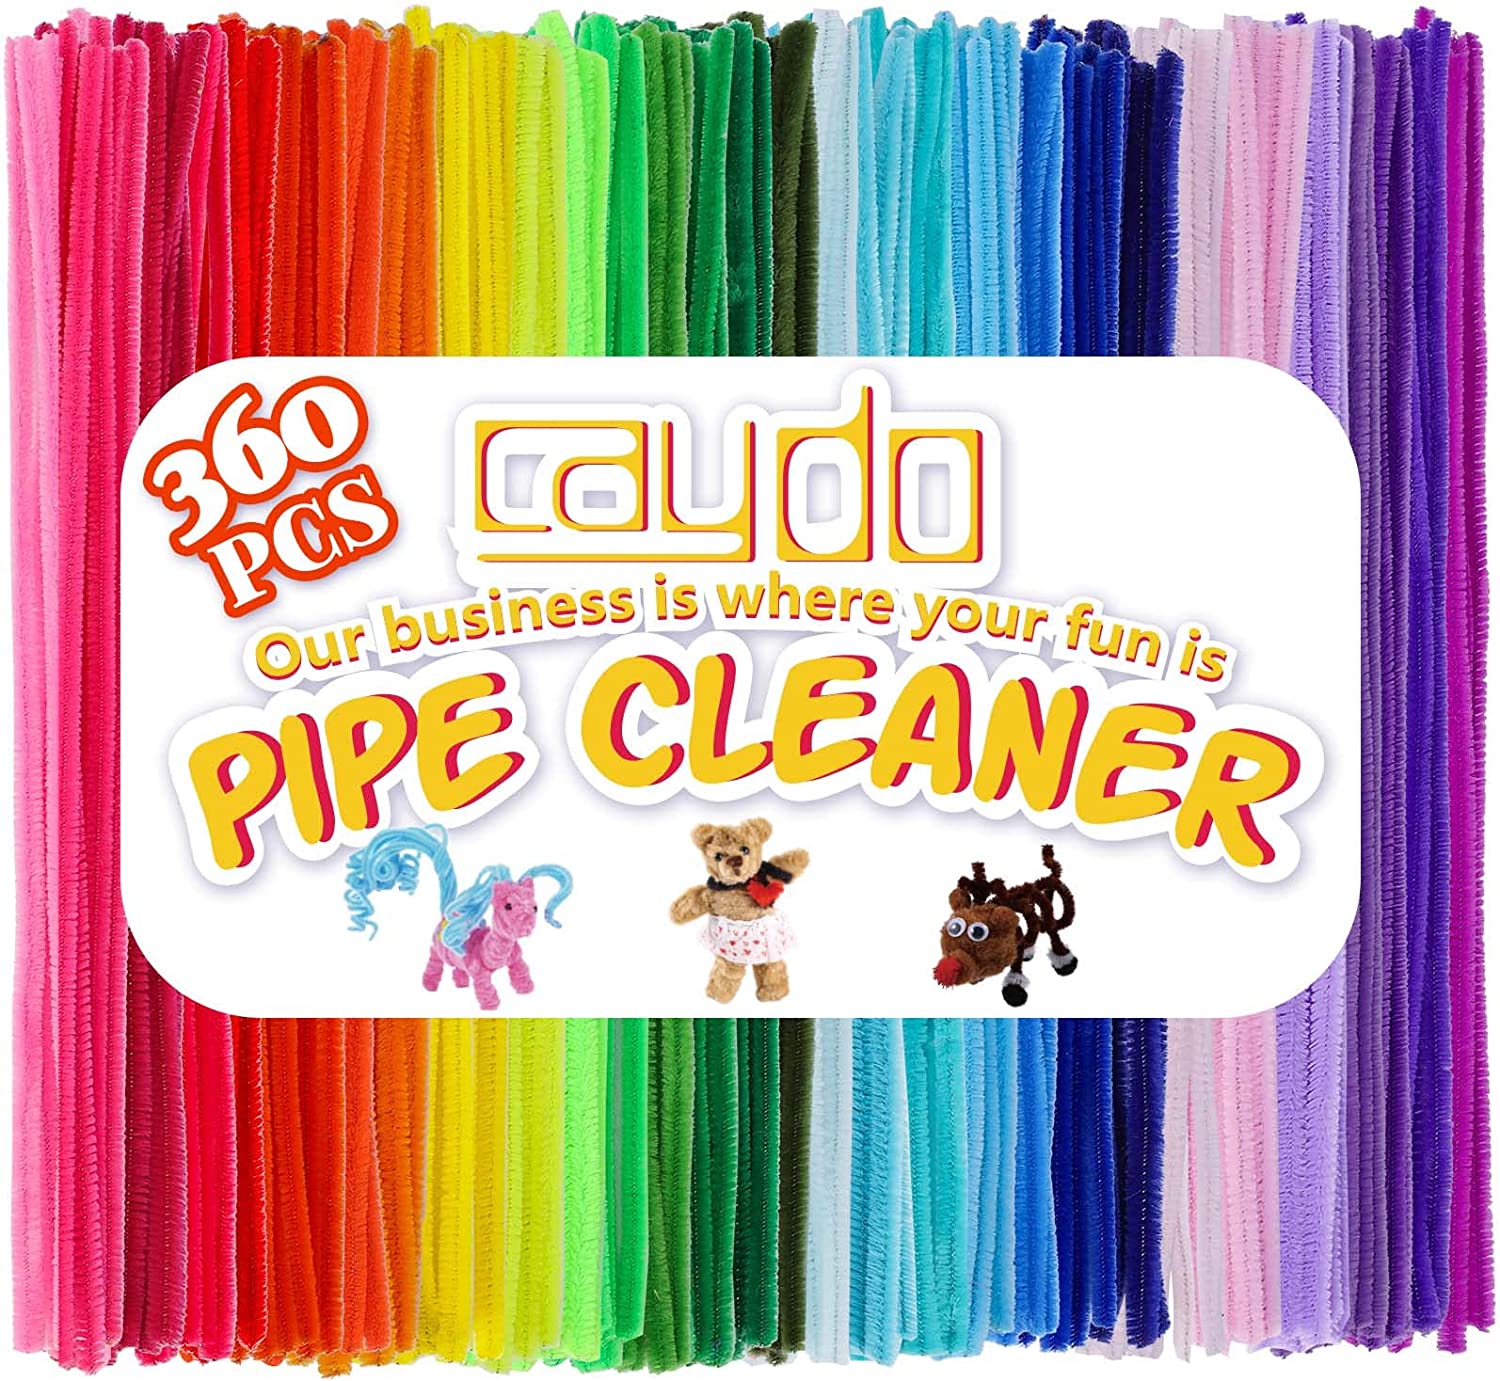 Includes Glitter Glue Pipe Cleaners Caydo Arts and Crafts Supplies for Kids- Over 1000 Pieces of Colorful and Creative Arts and Crafts Materials Pom poms Popsicle Sticks for Kids and Toddlers 